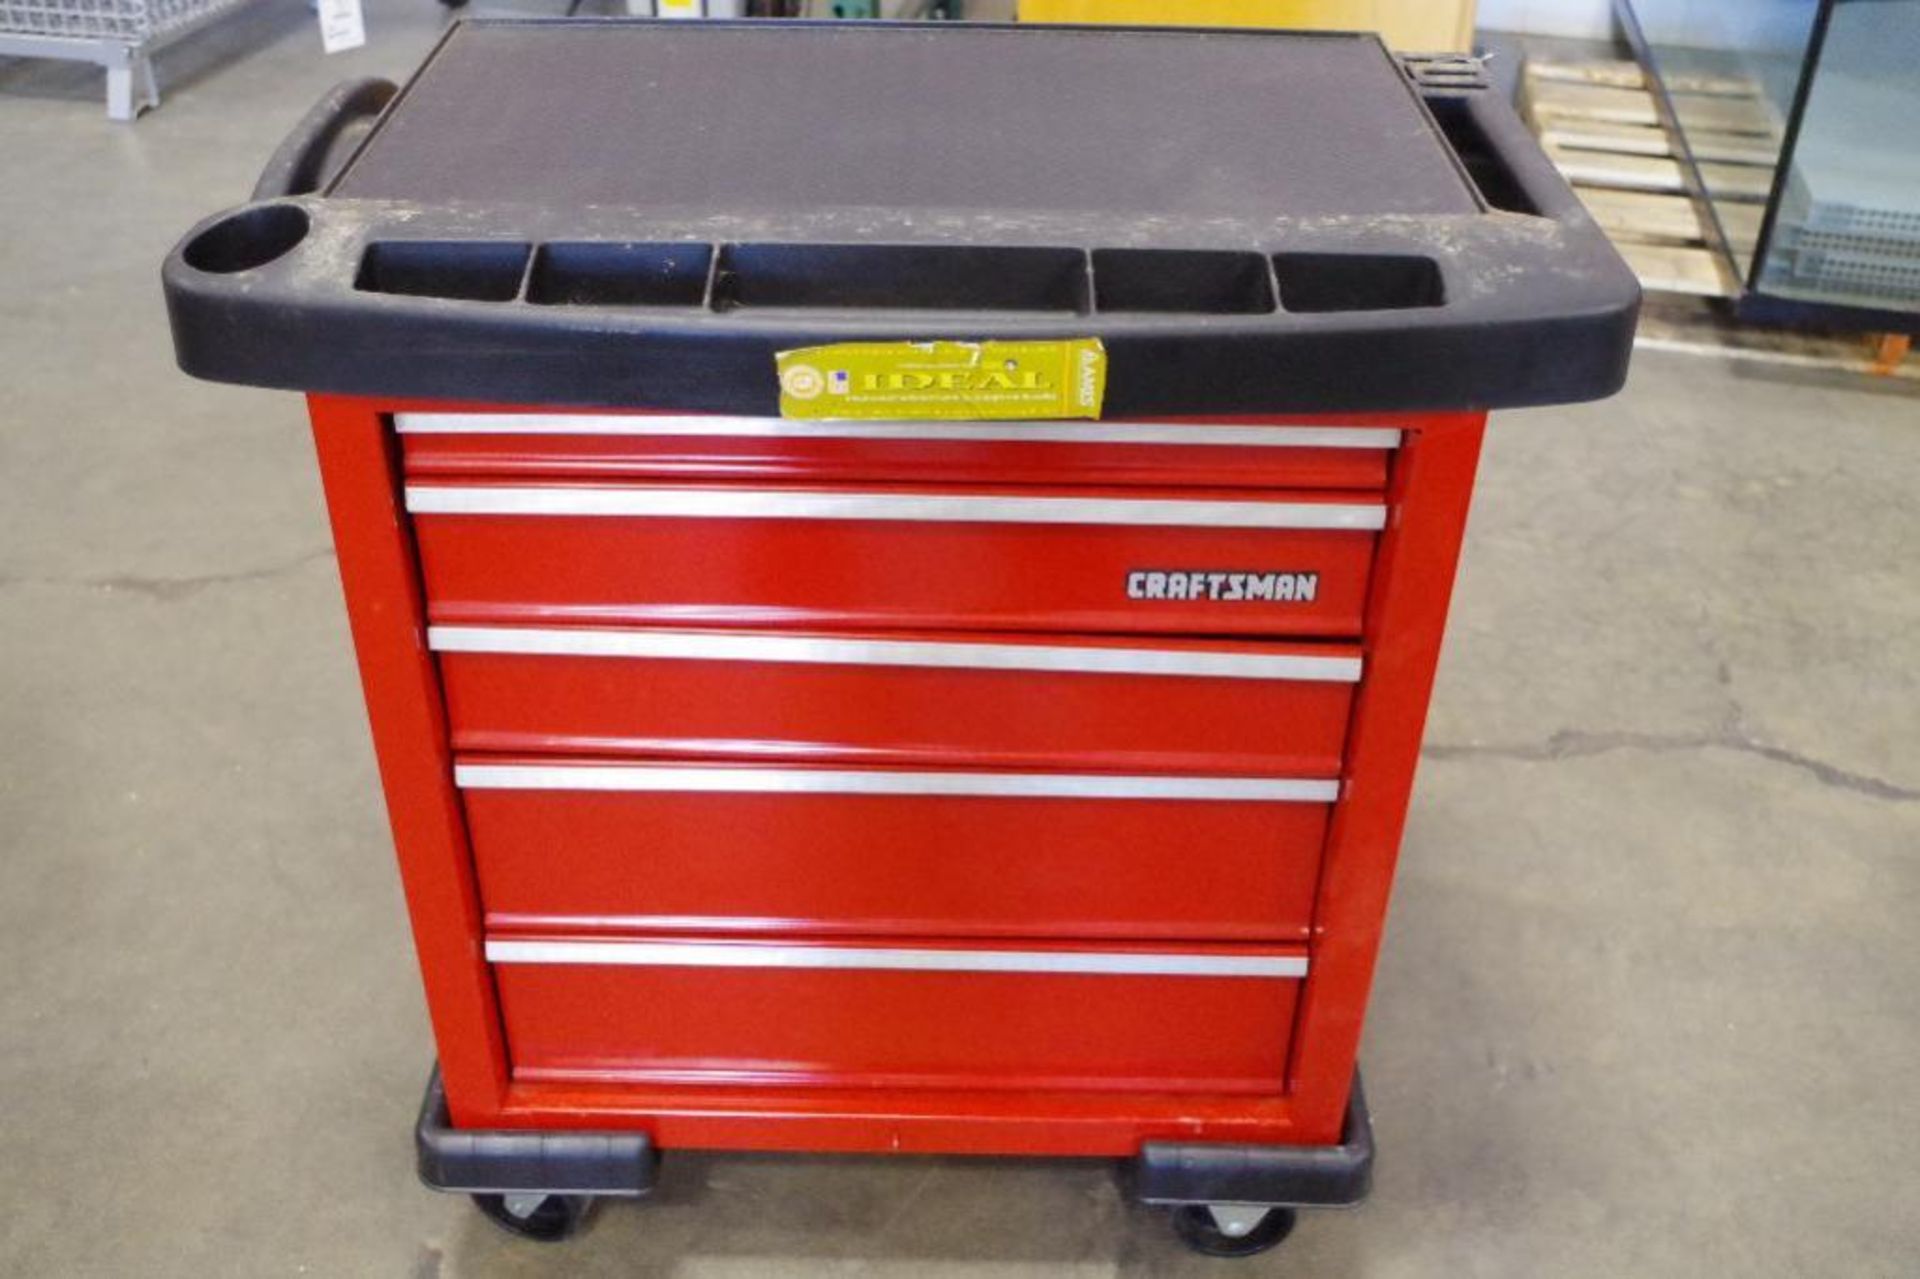 CRAFTSMAN 5-Drawer Rolling Tool Chest - Image 2 of 5